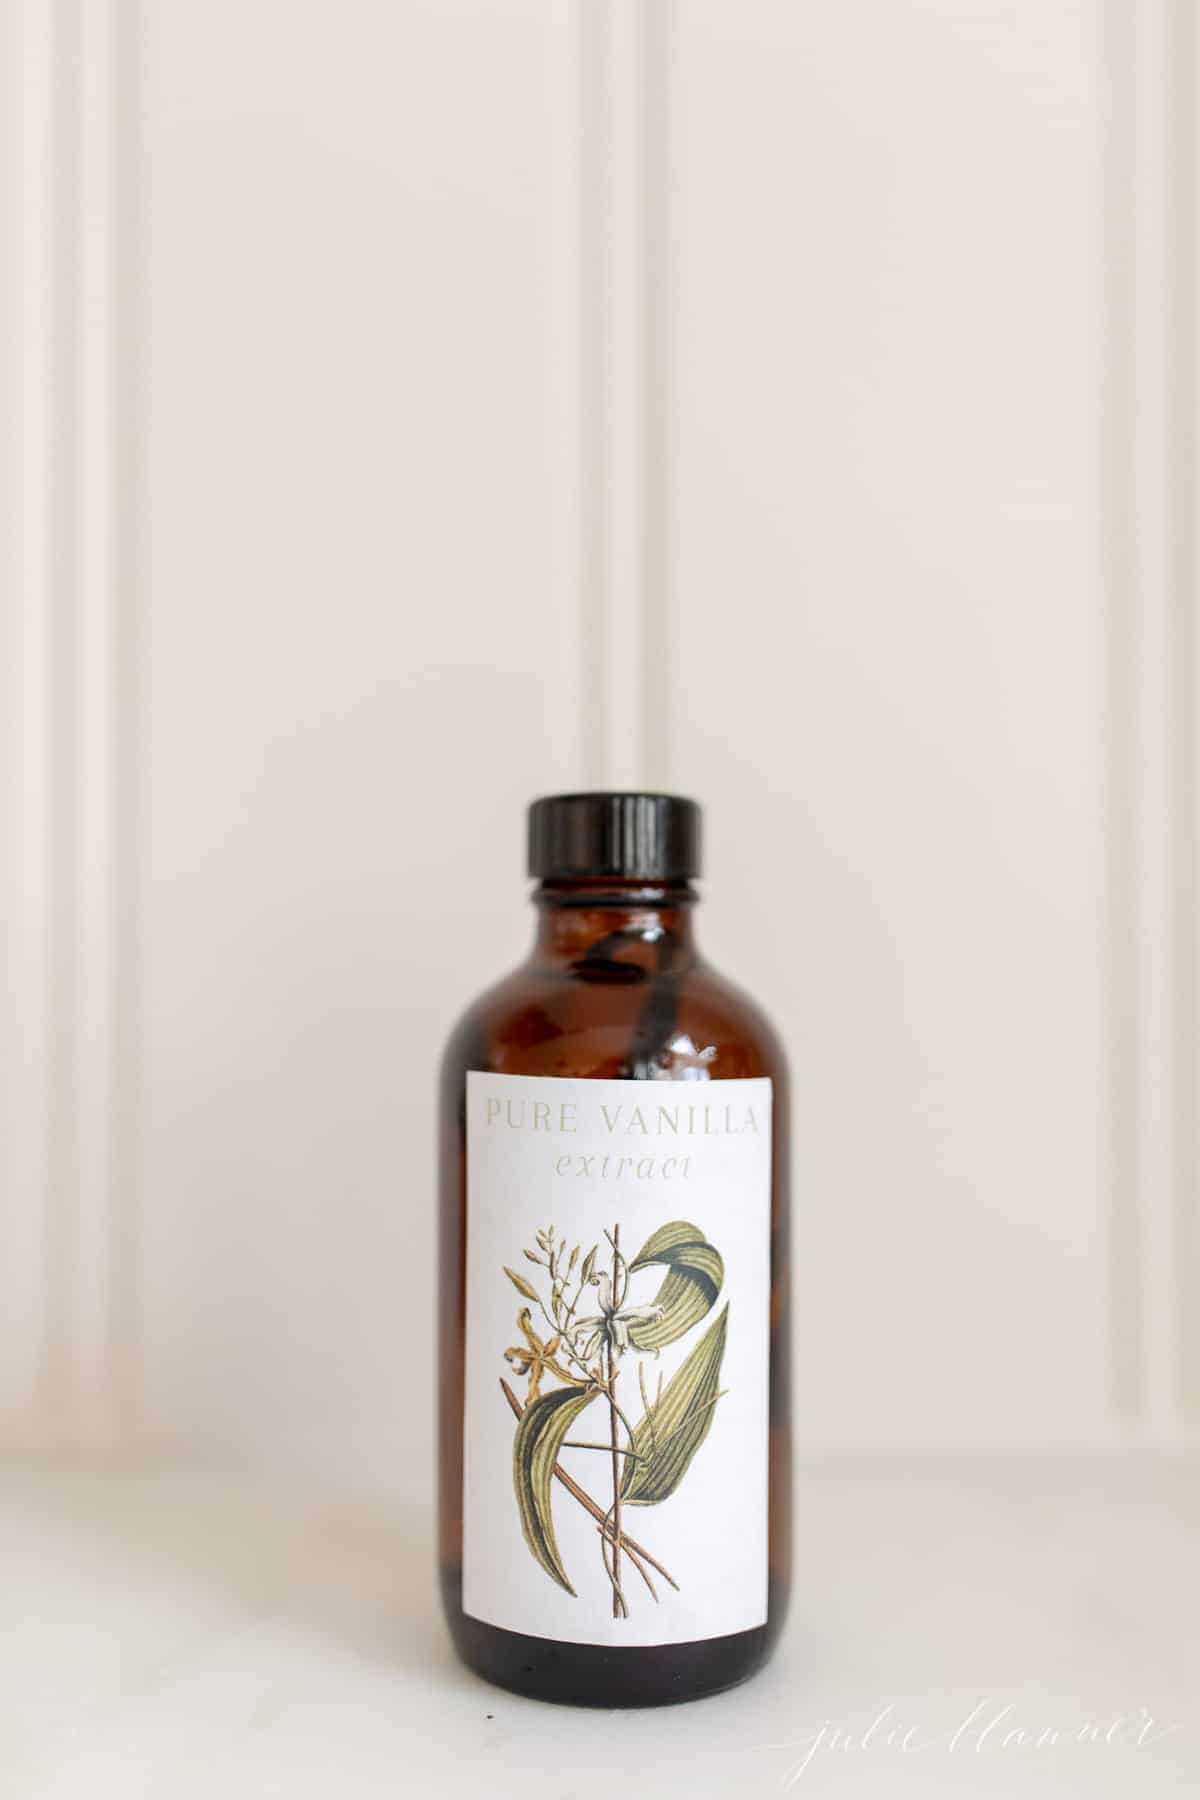 A brown glass bottle of vanilla extract on a white surface.